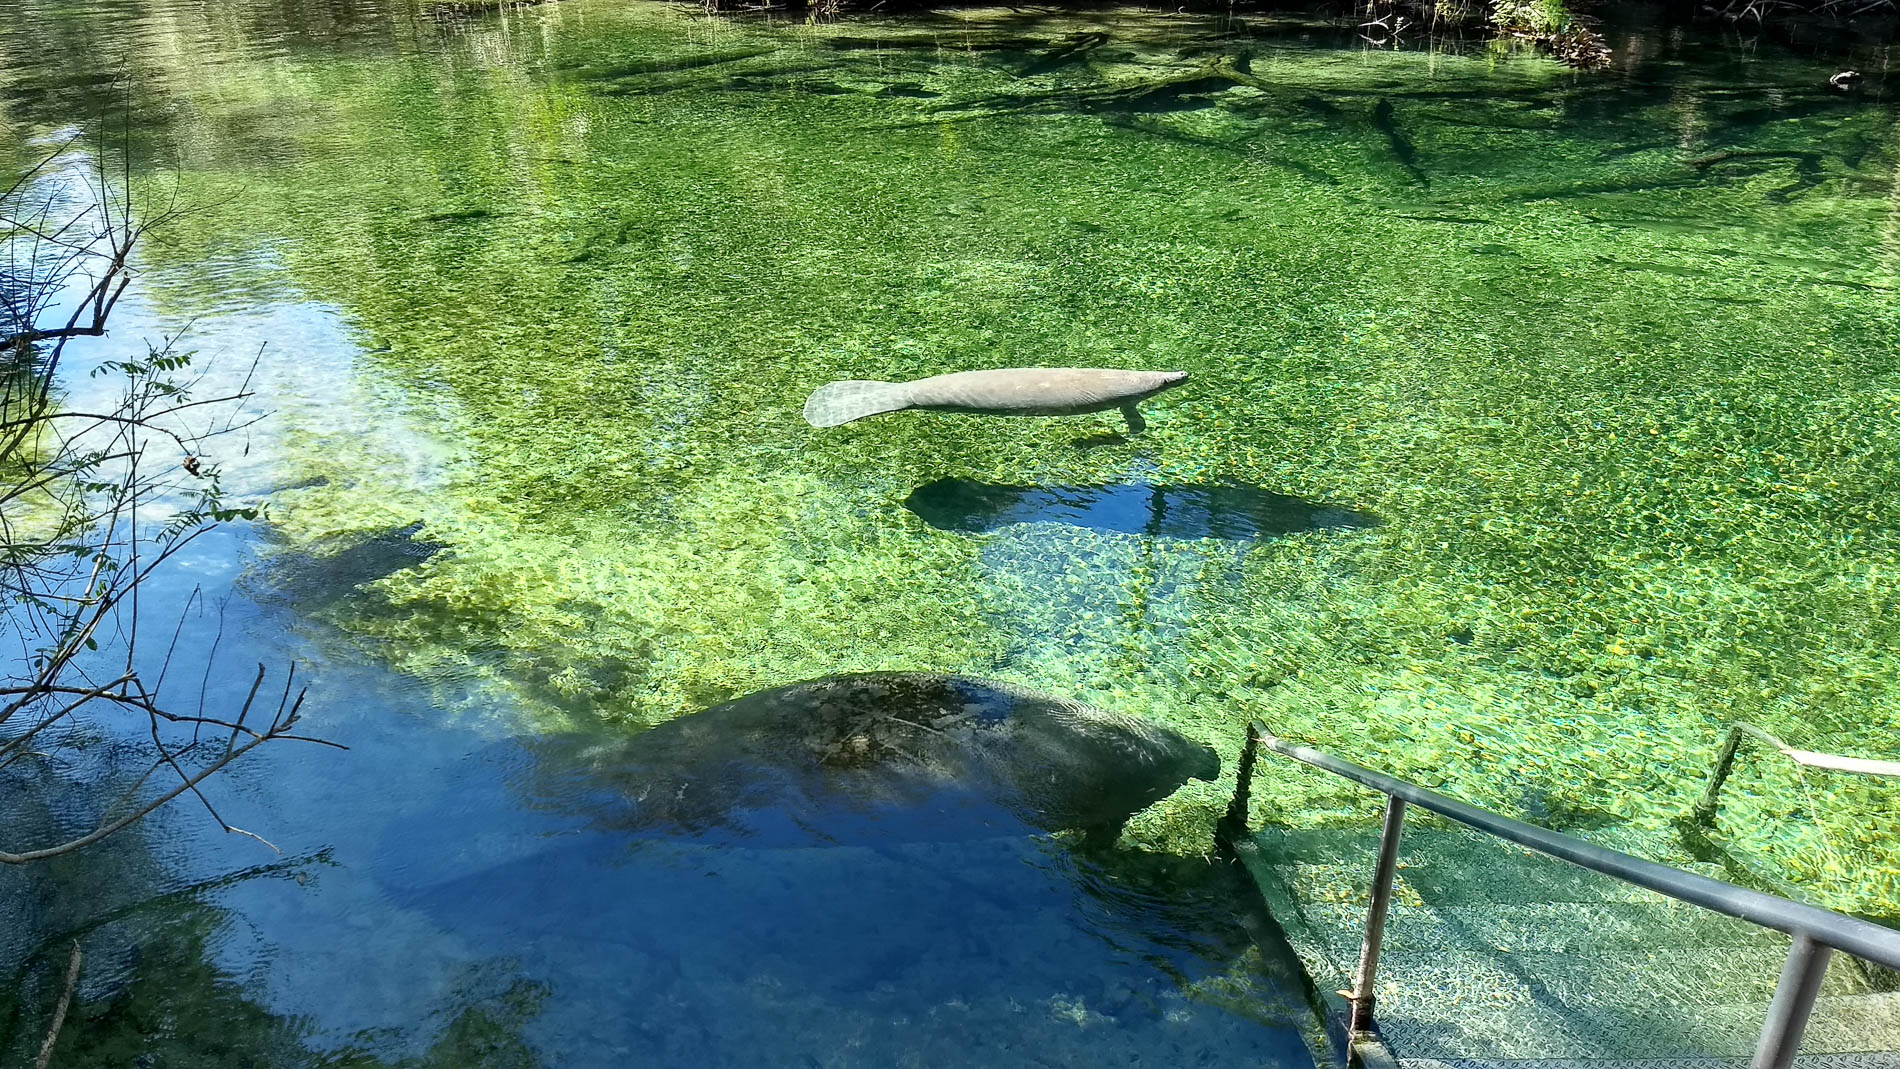 Manatees of Blue Springs State Park